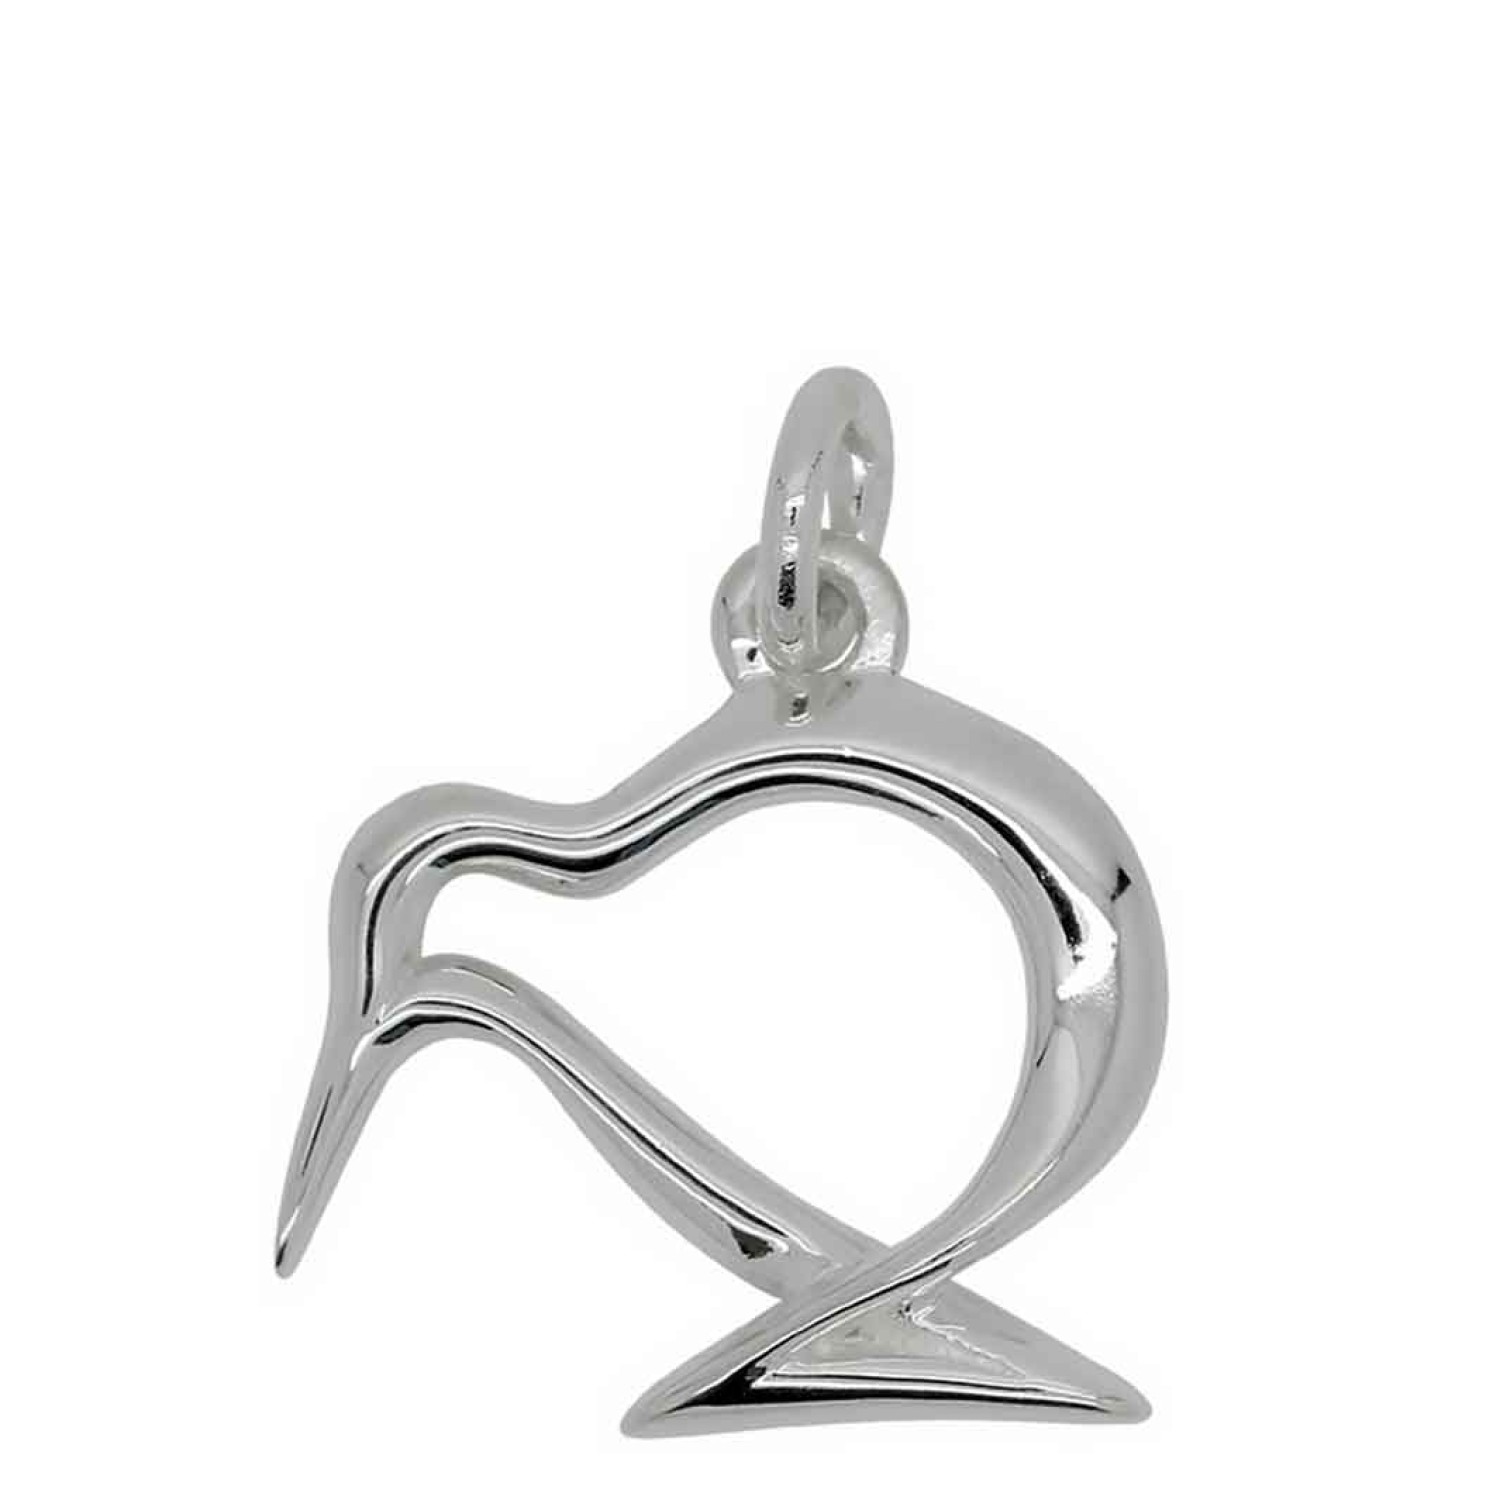 PN242CHB NZ Kiwi Pendant. Crafted in either sterling silver or 9ct gold this pendant comes complete with a 45cm pendant chain. Oxipay is simply the easier way to pay - use Oxipay and well spread your payment up to a maximum of $1500 over 4 easy @christies